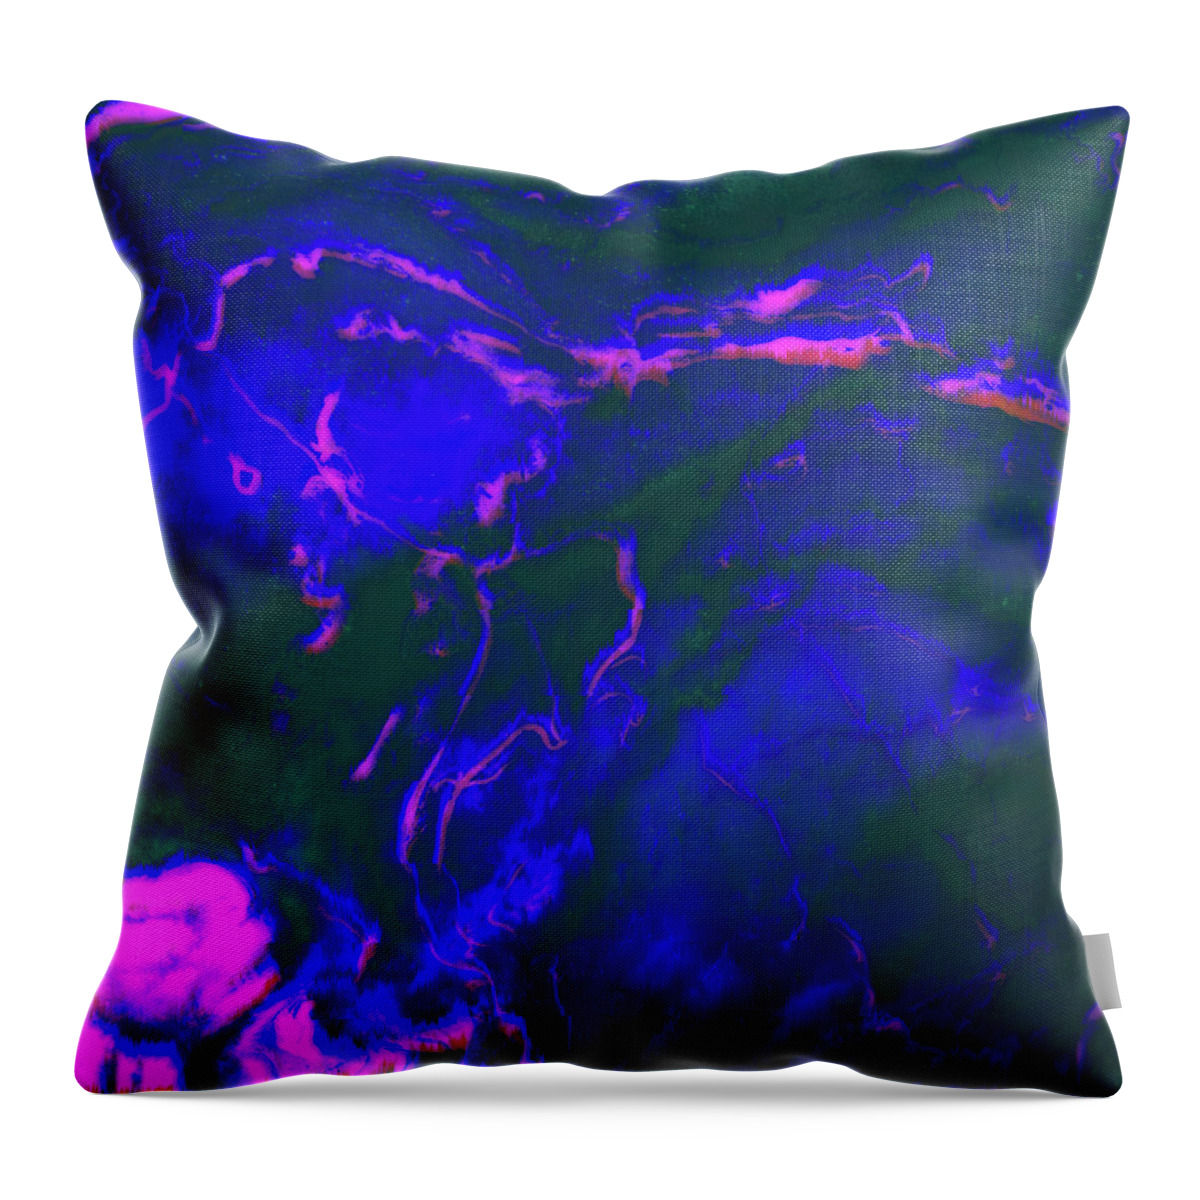 Glitch Throw Pillow featuring the digital art Neon Nightriders by Jennifer Walsh